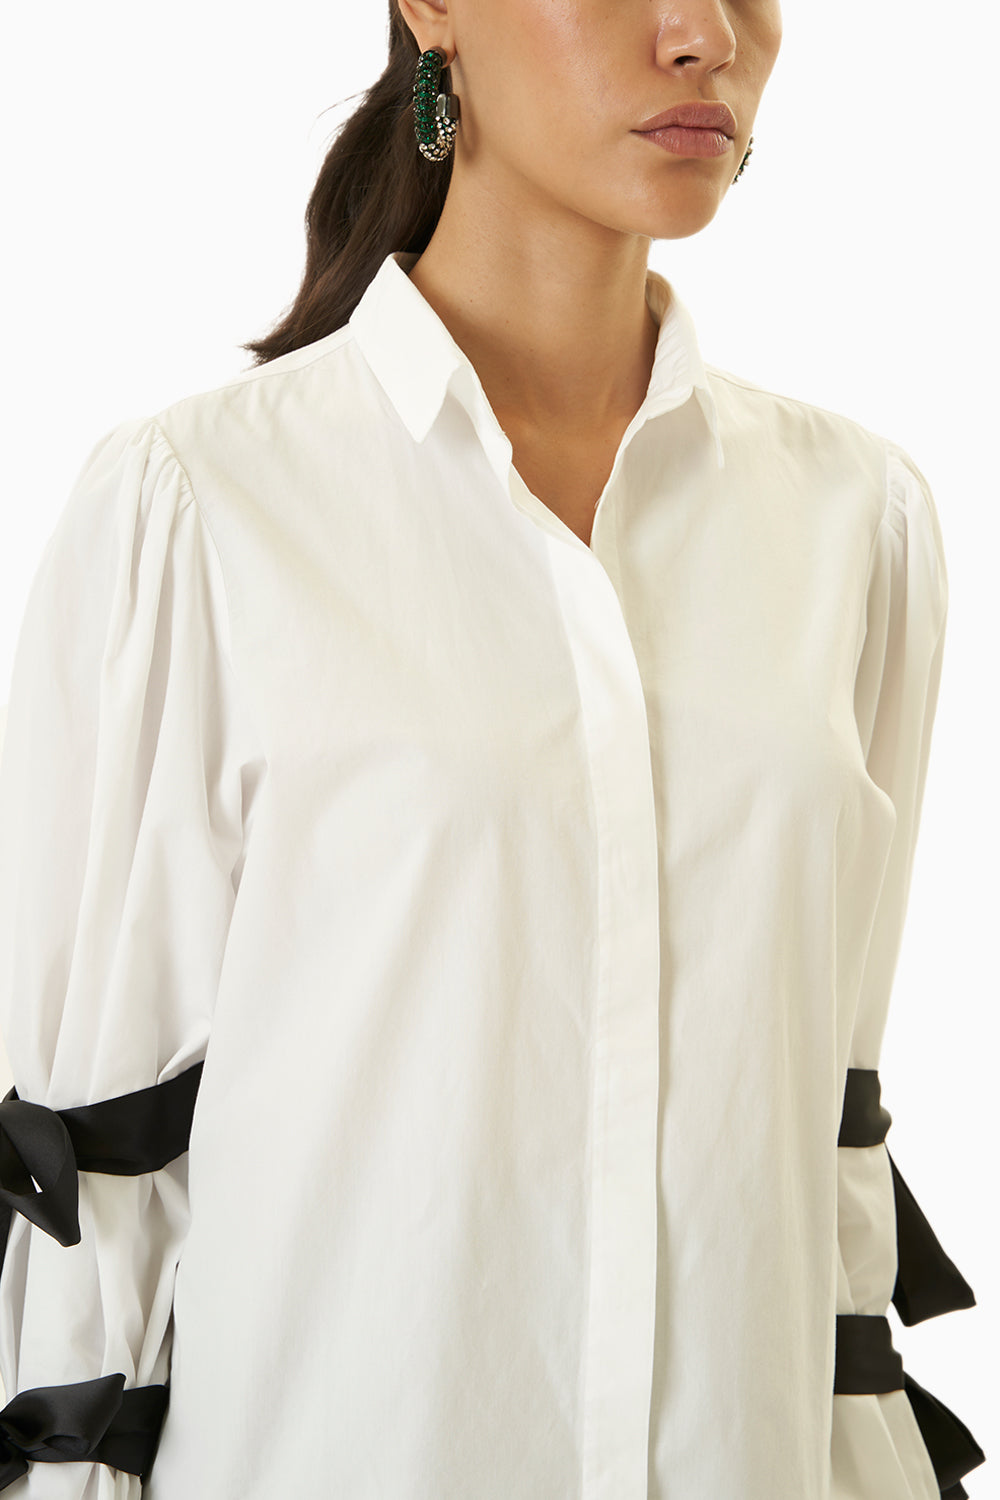 Contrast White Sleeve Tie Shirt